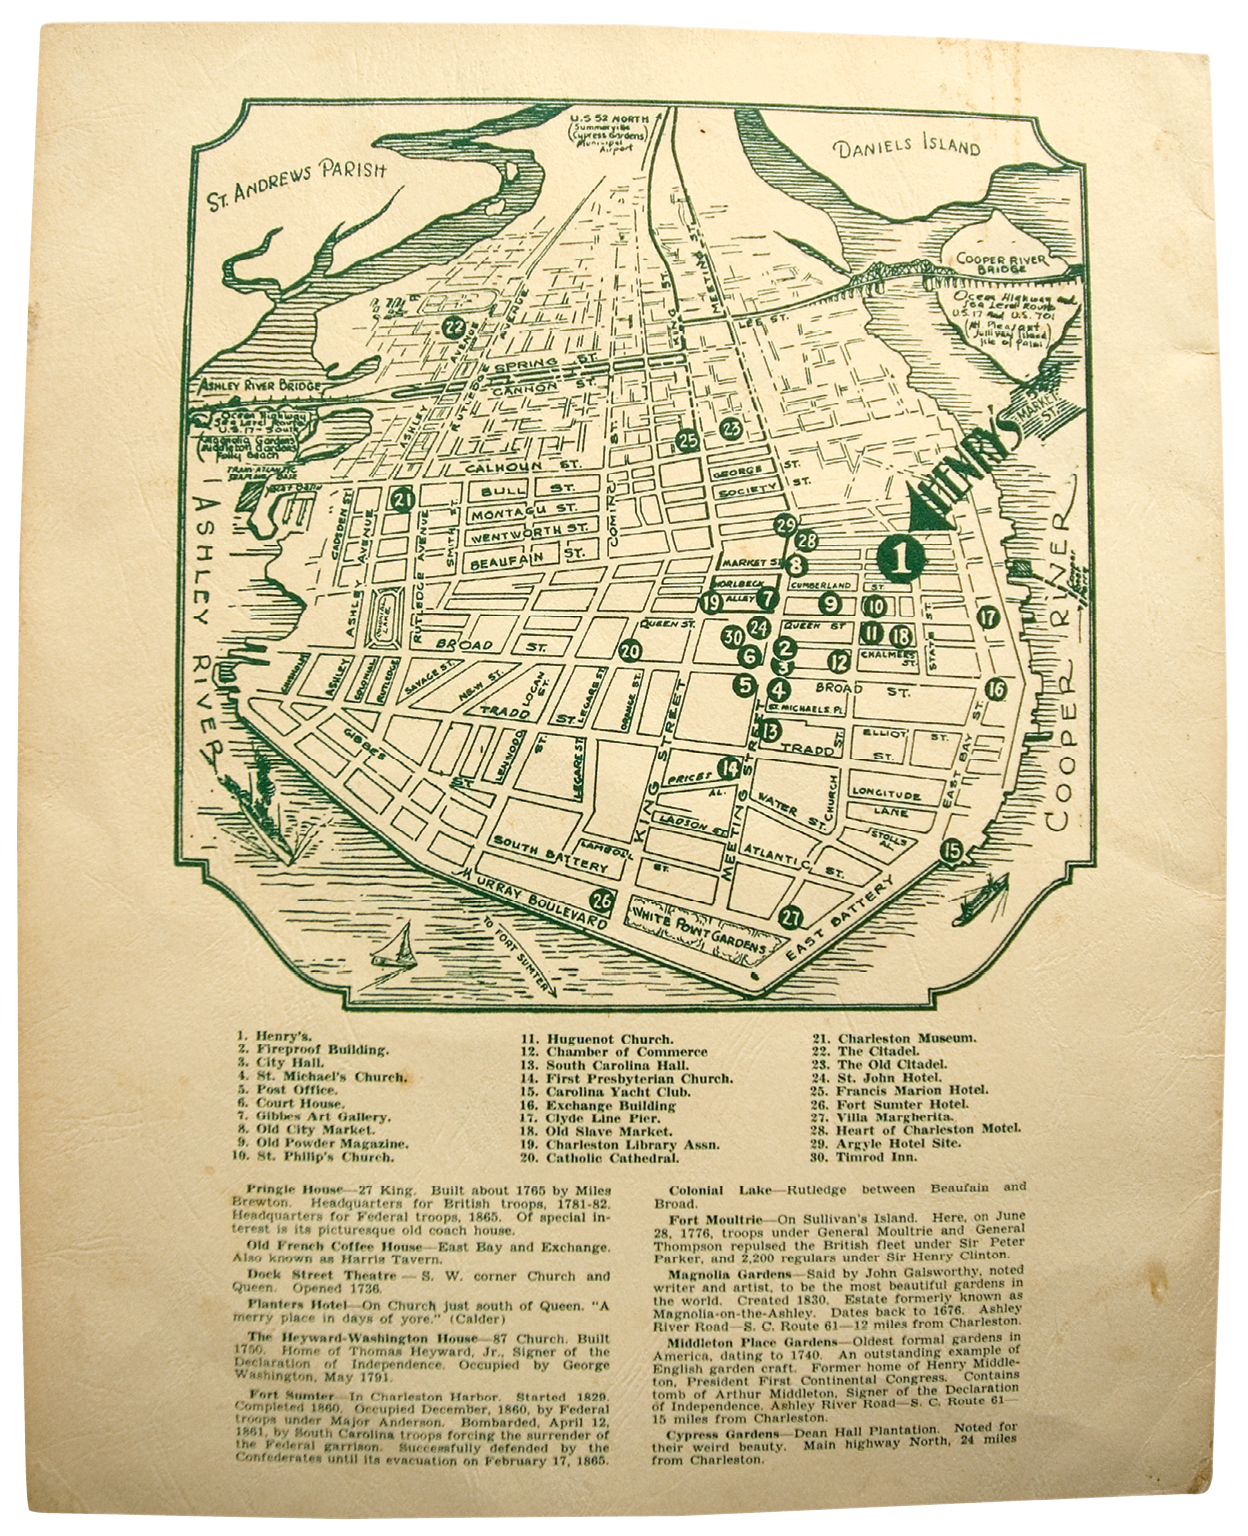 A promotional map of the city’s sites and institutions features a prominent arrow pointing to the legendary Charleston eatery, located on Market Street.